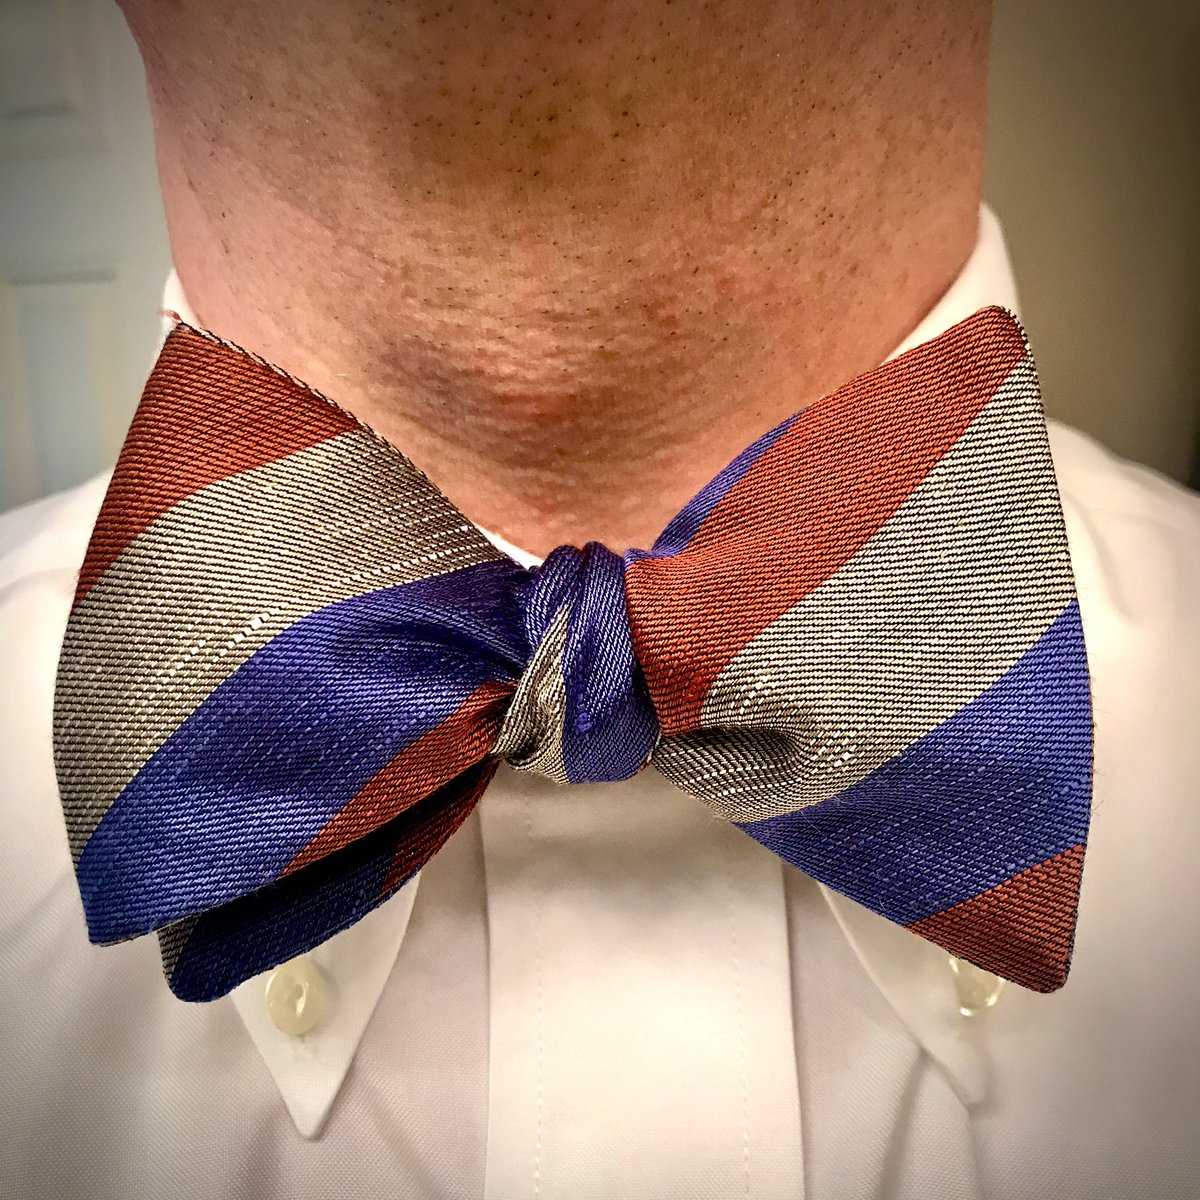 @beautiesltd Always! Here’s a special one that combines my love of bow ties with my love of Conan Doyle: